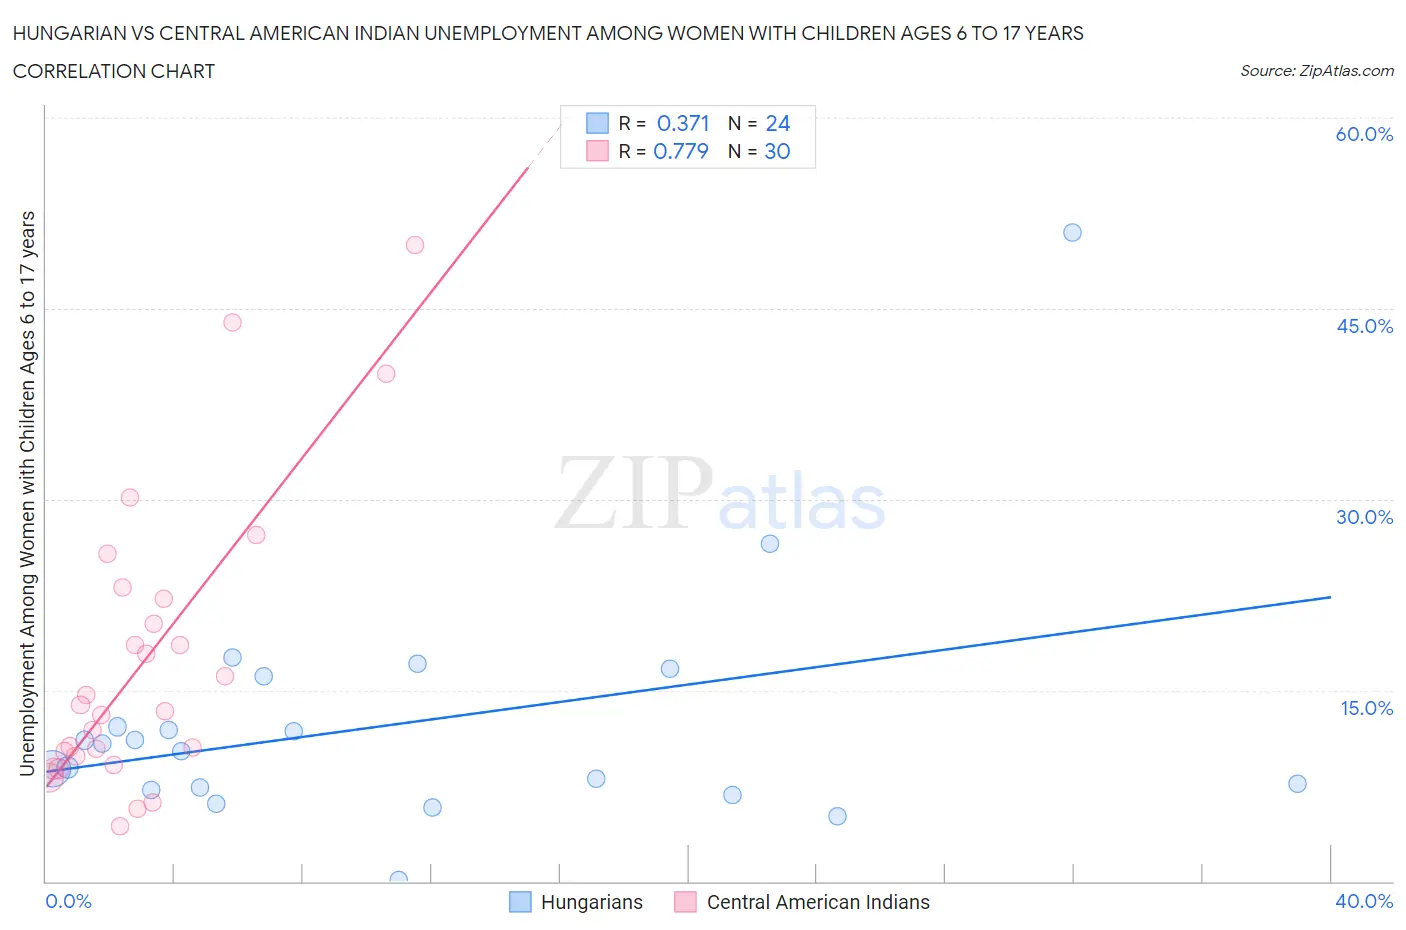 Hungarian vs Central American Indian Unemployment Among Women with Children Ages 6 to 17 years